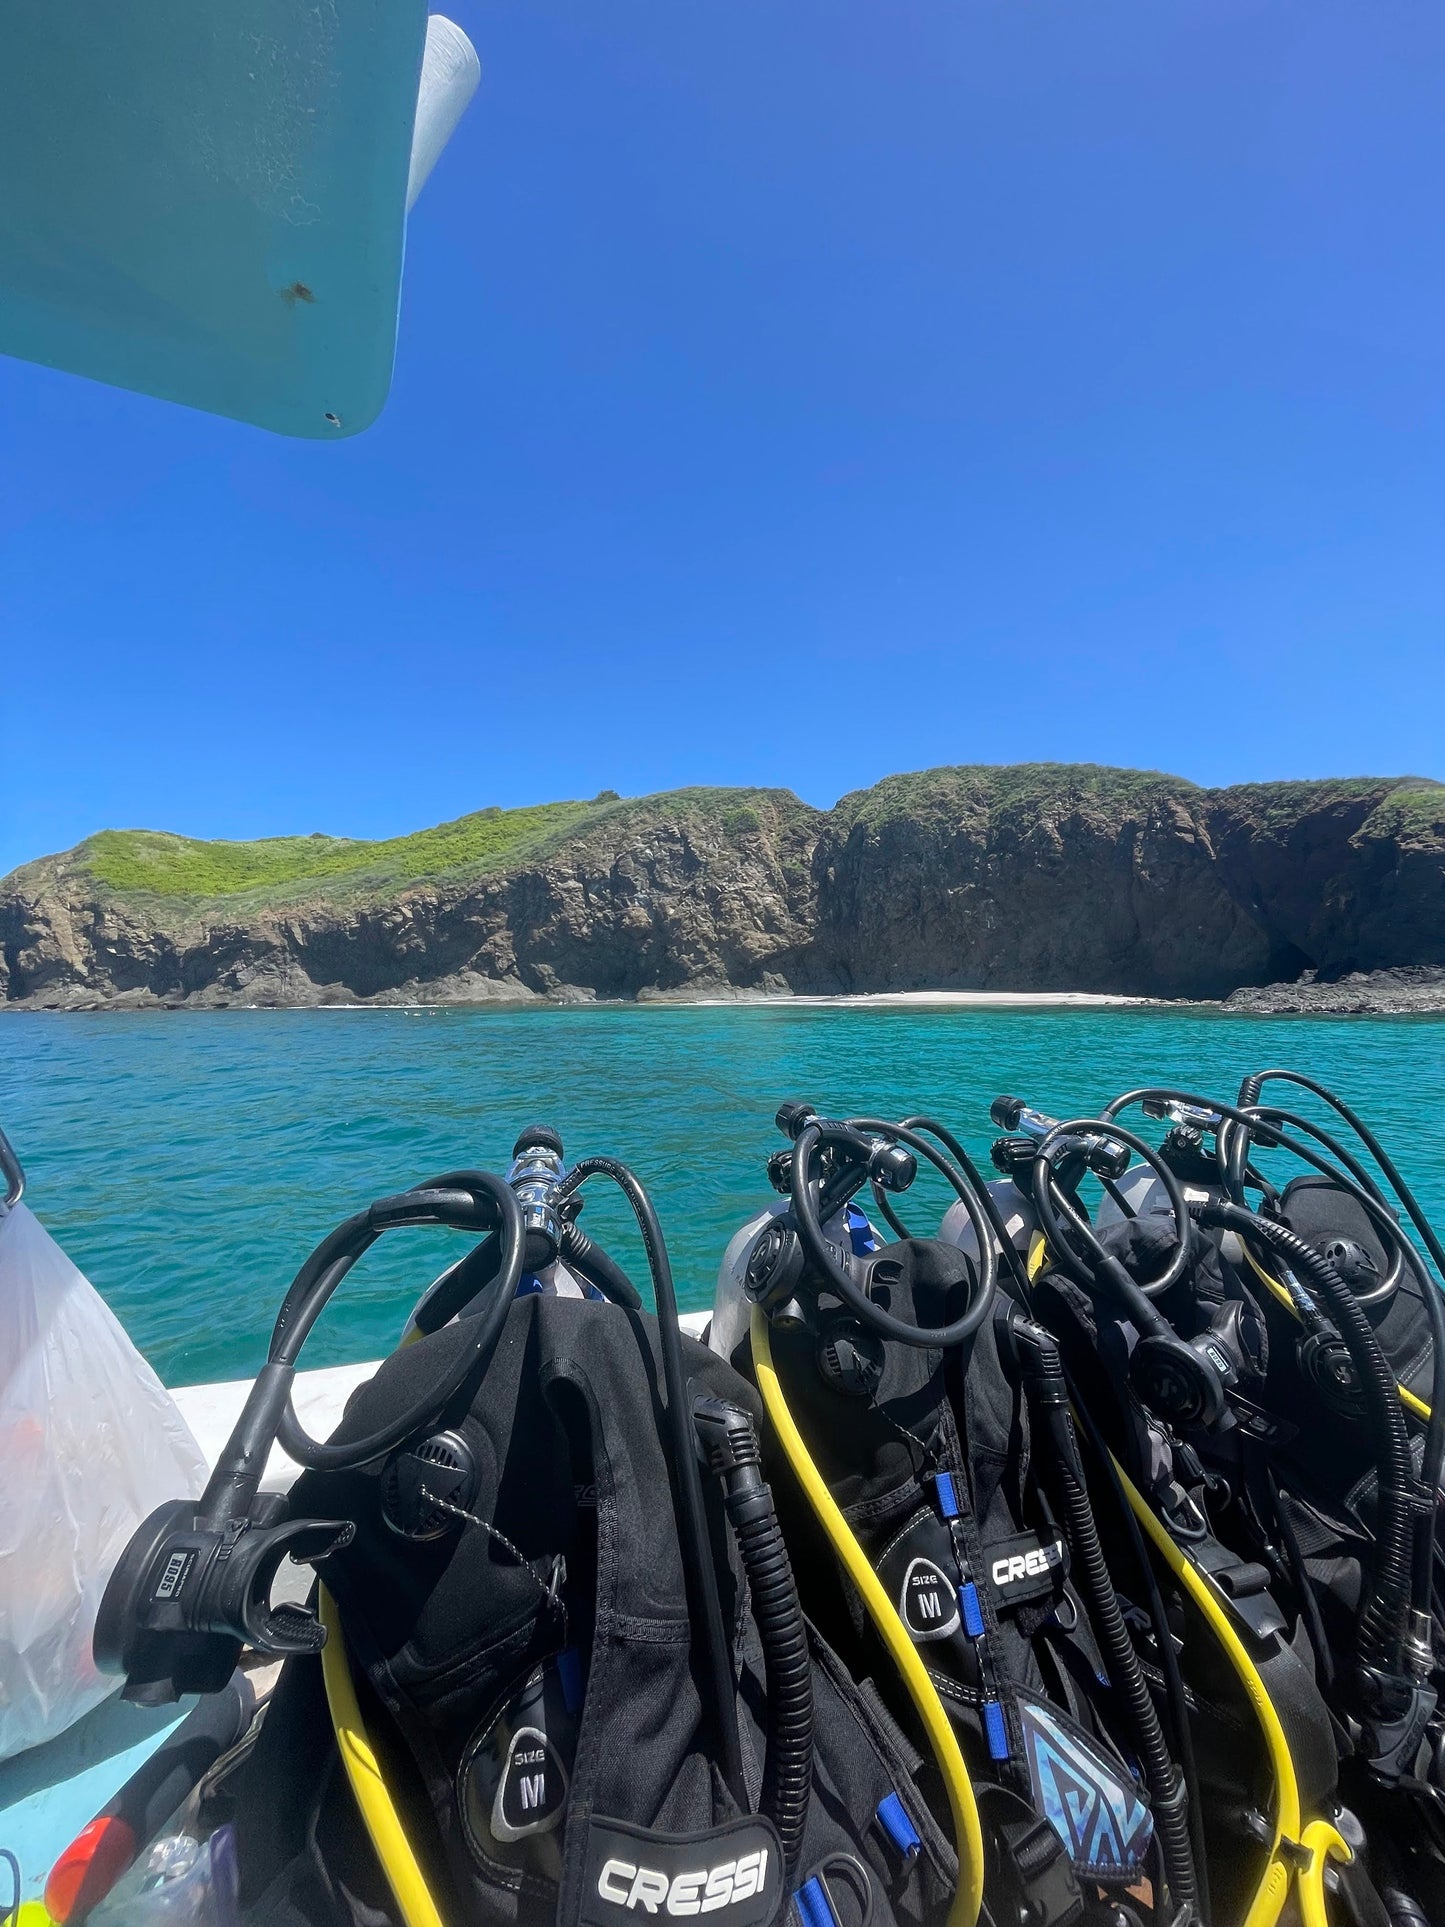 Scuba diving gear at the edge of a boat overlooking the turquoise water in Islas Catalinas.